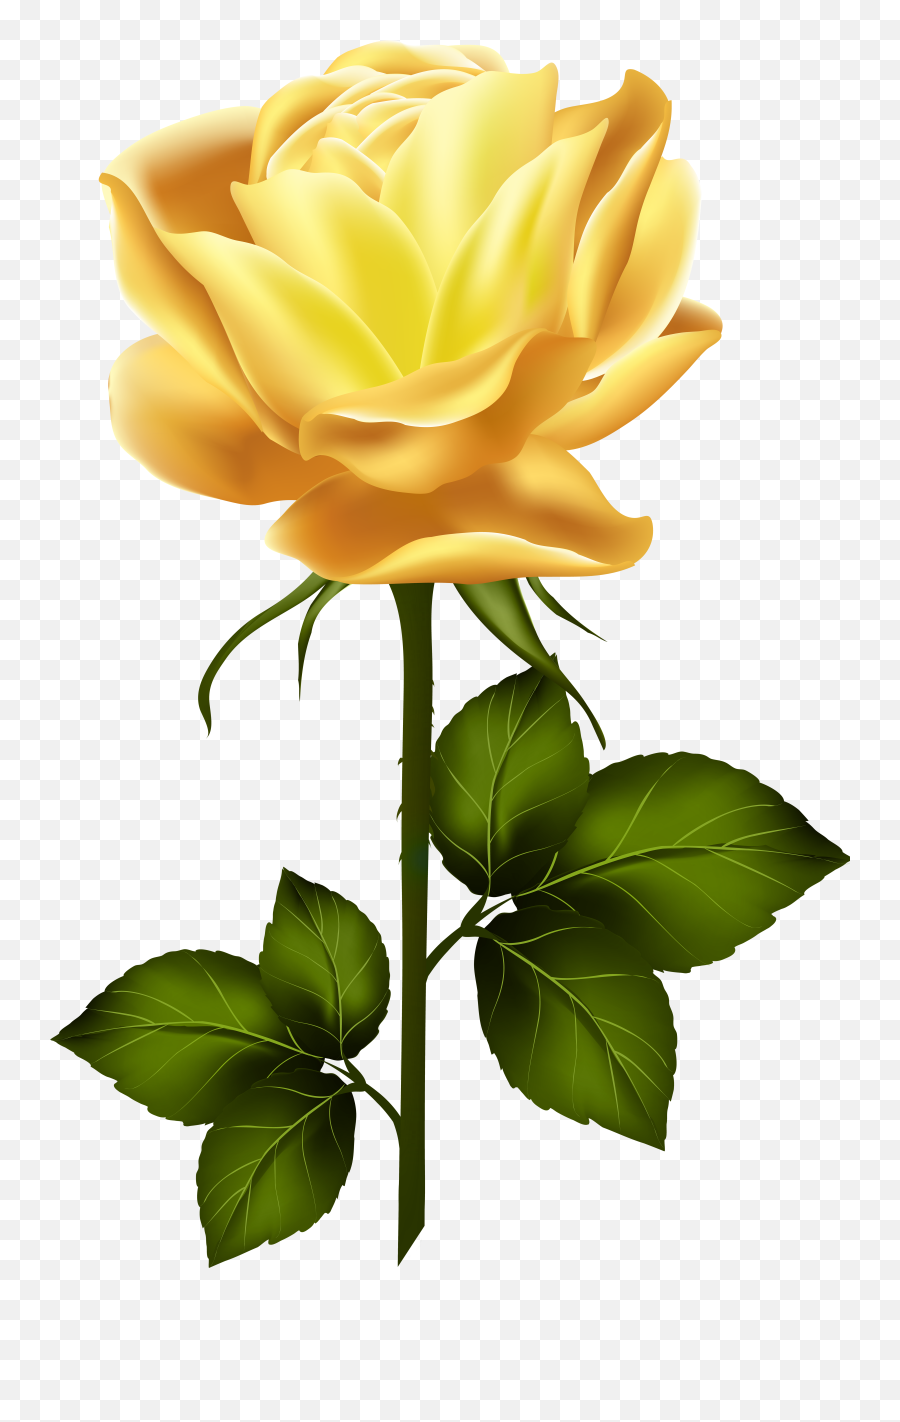 Hd Yellow Rose With Stem Png Clip Art - Yellow Rose Png Images Hd,Yellow Rose Transparent